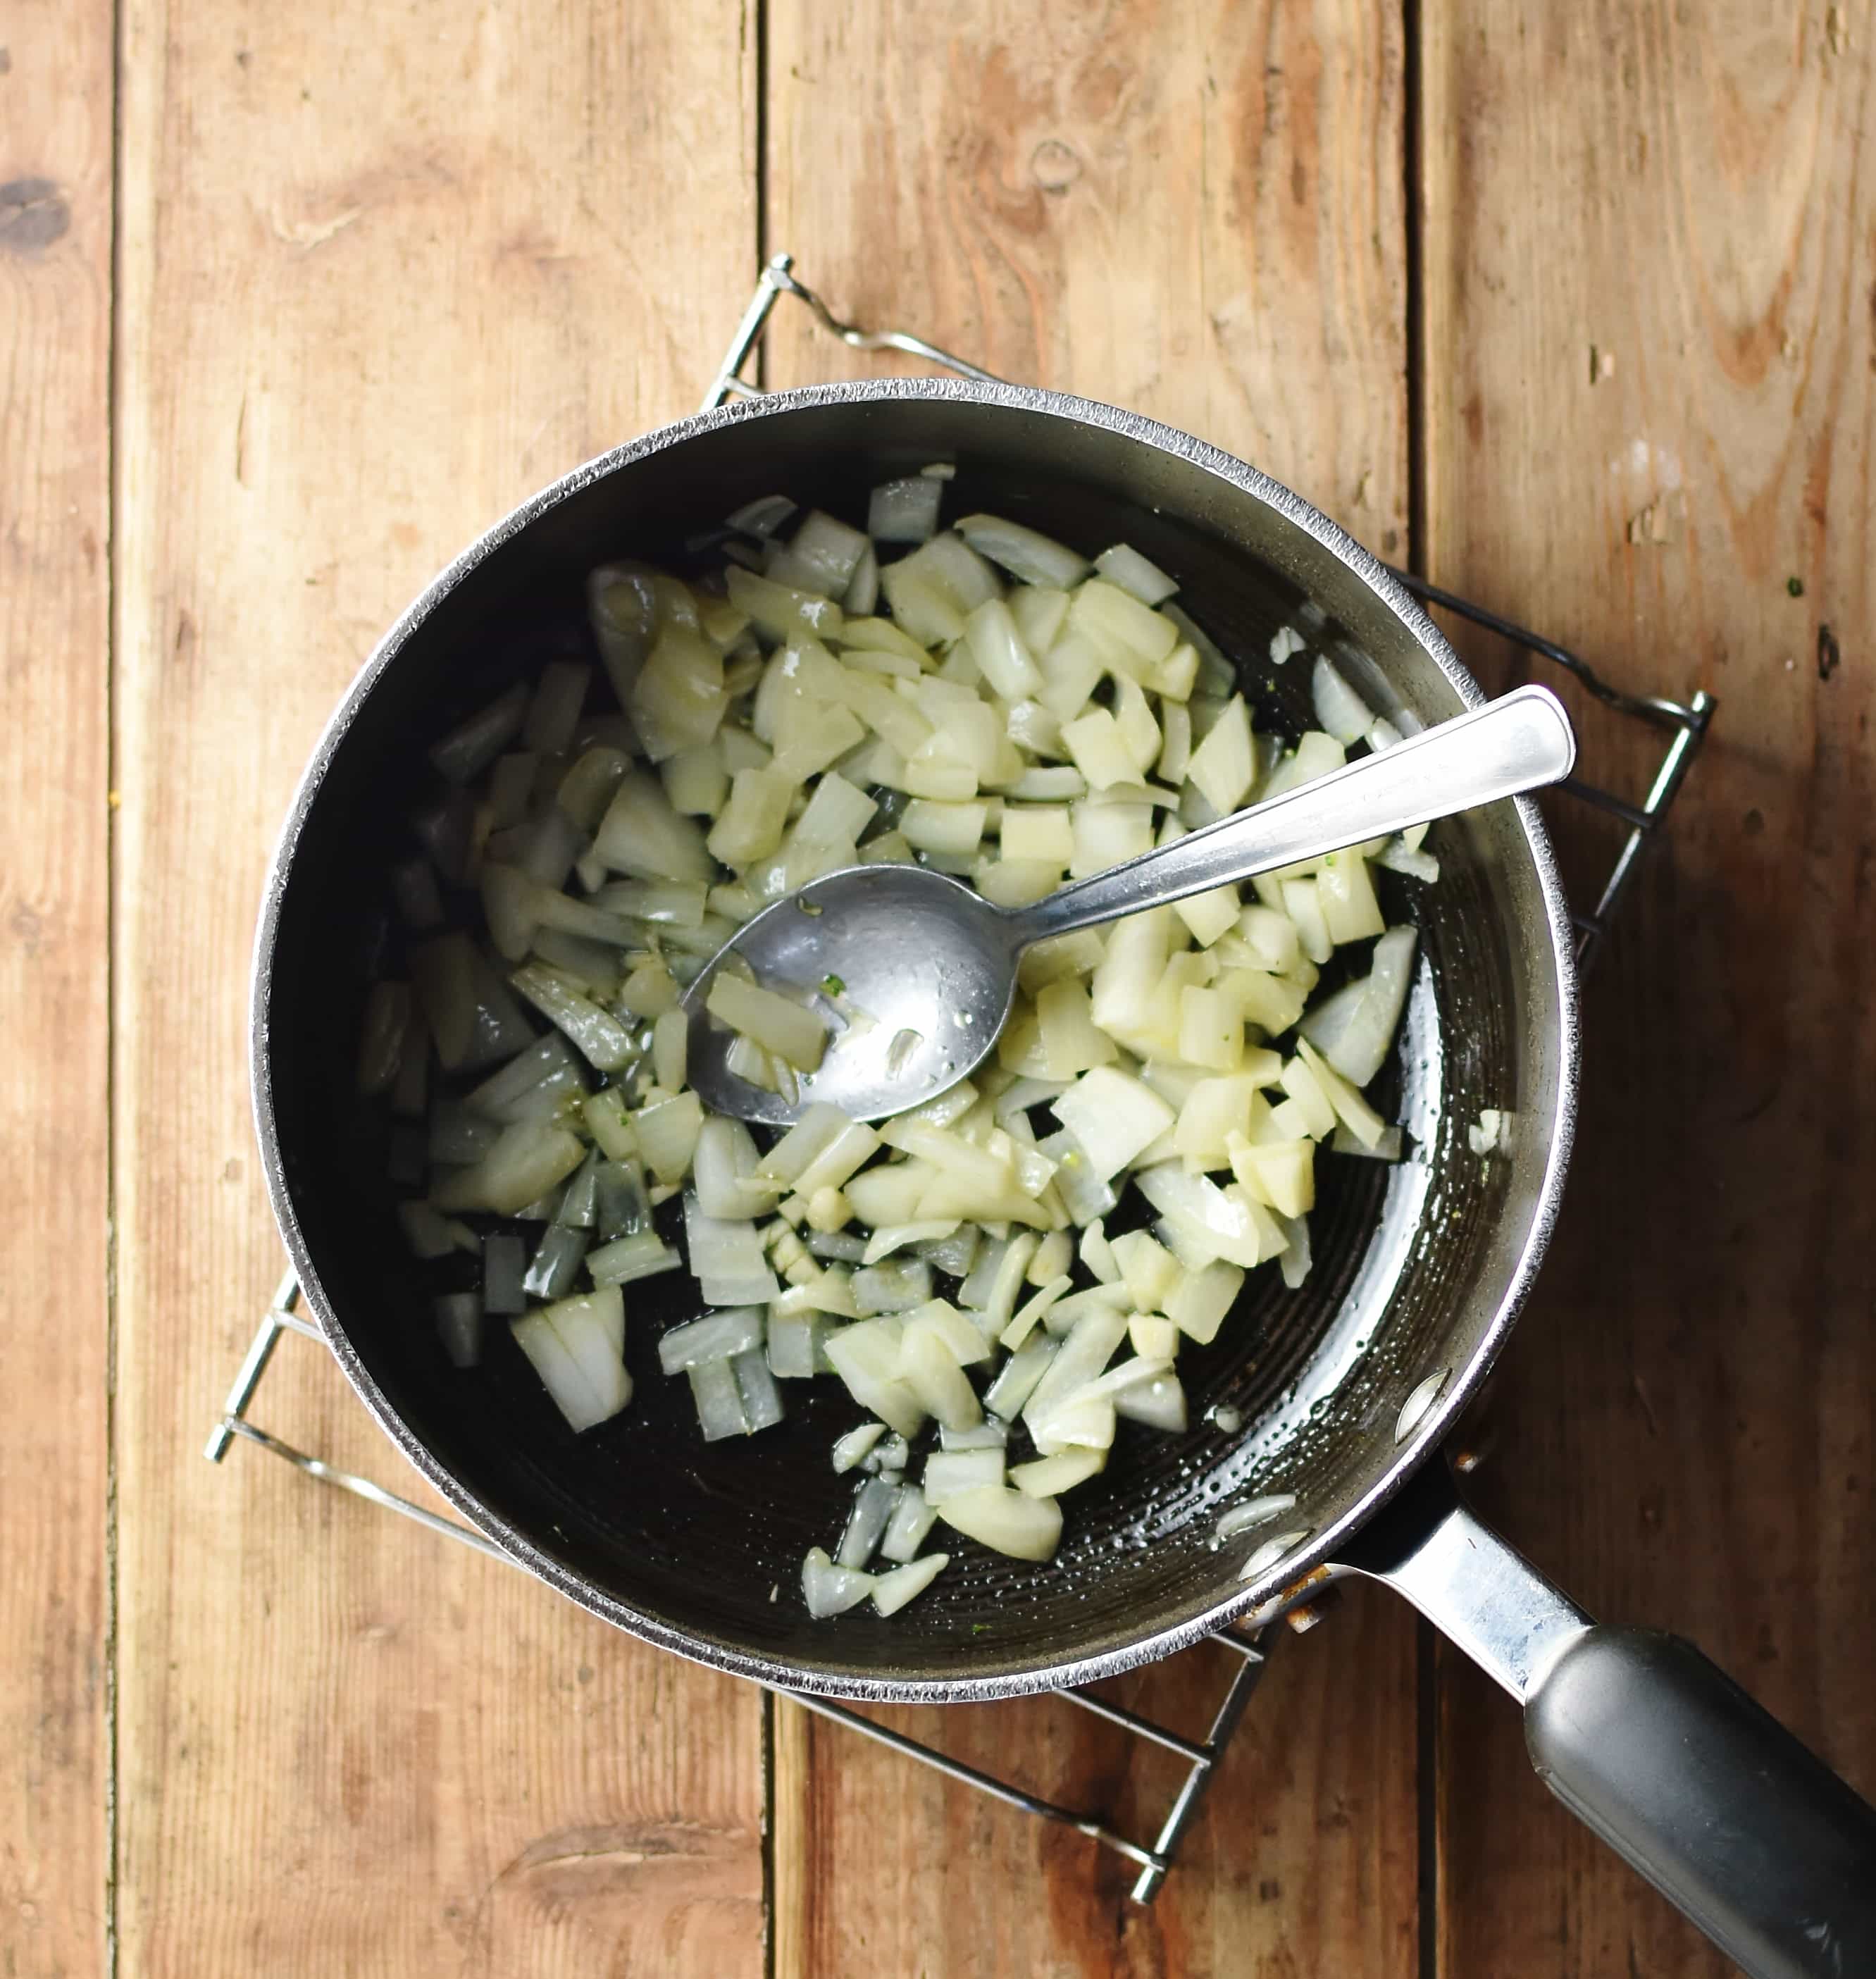 Chopped onions in large pot with spoon.